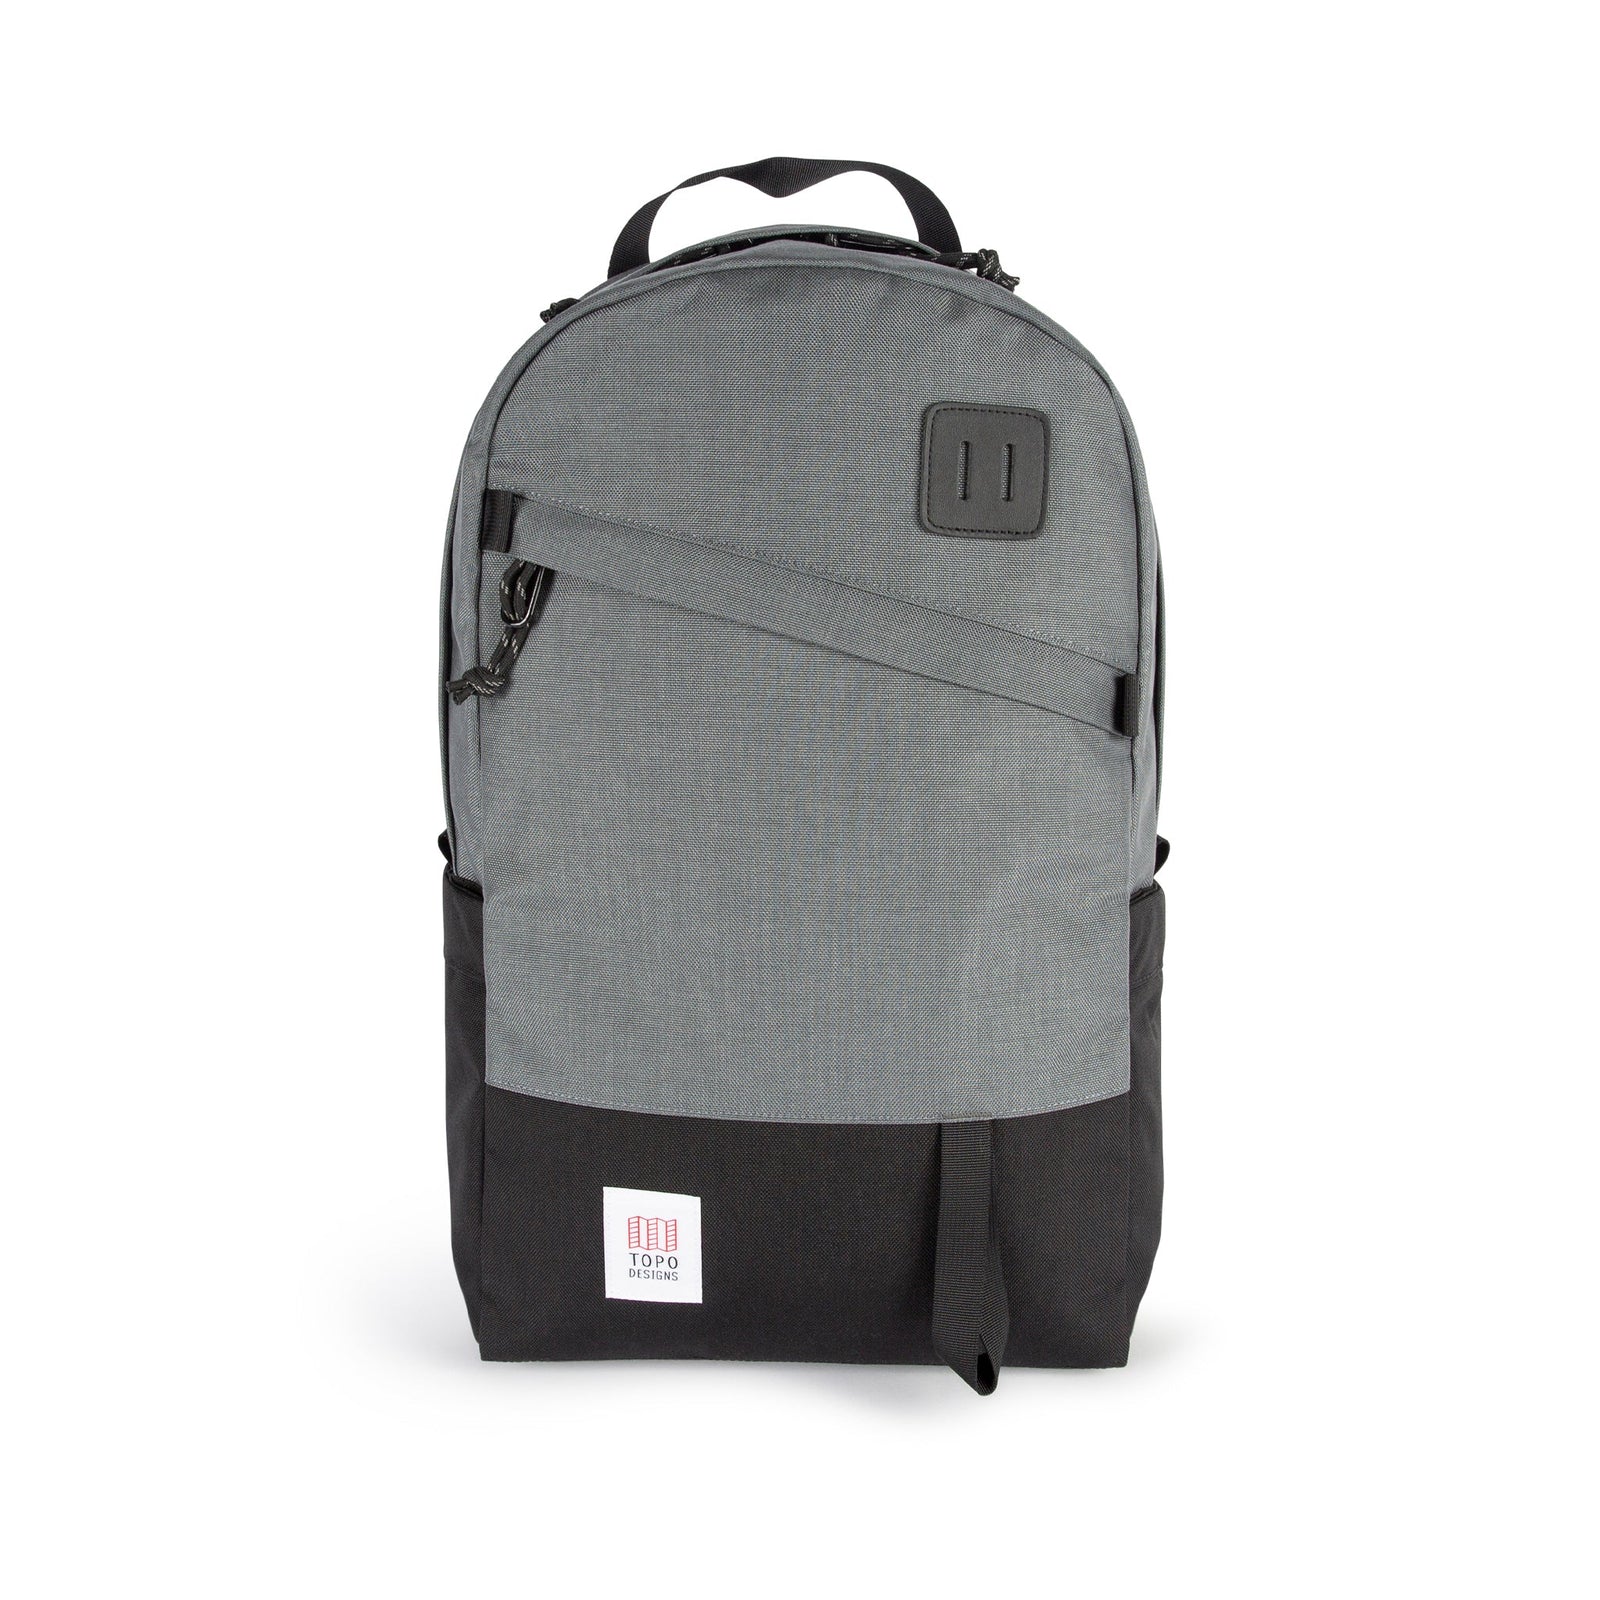 Topo Designs Daypack Classic 100% recycled nylon laptop backpack for work or school in "Charcoal / Black".